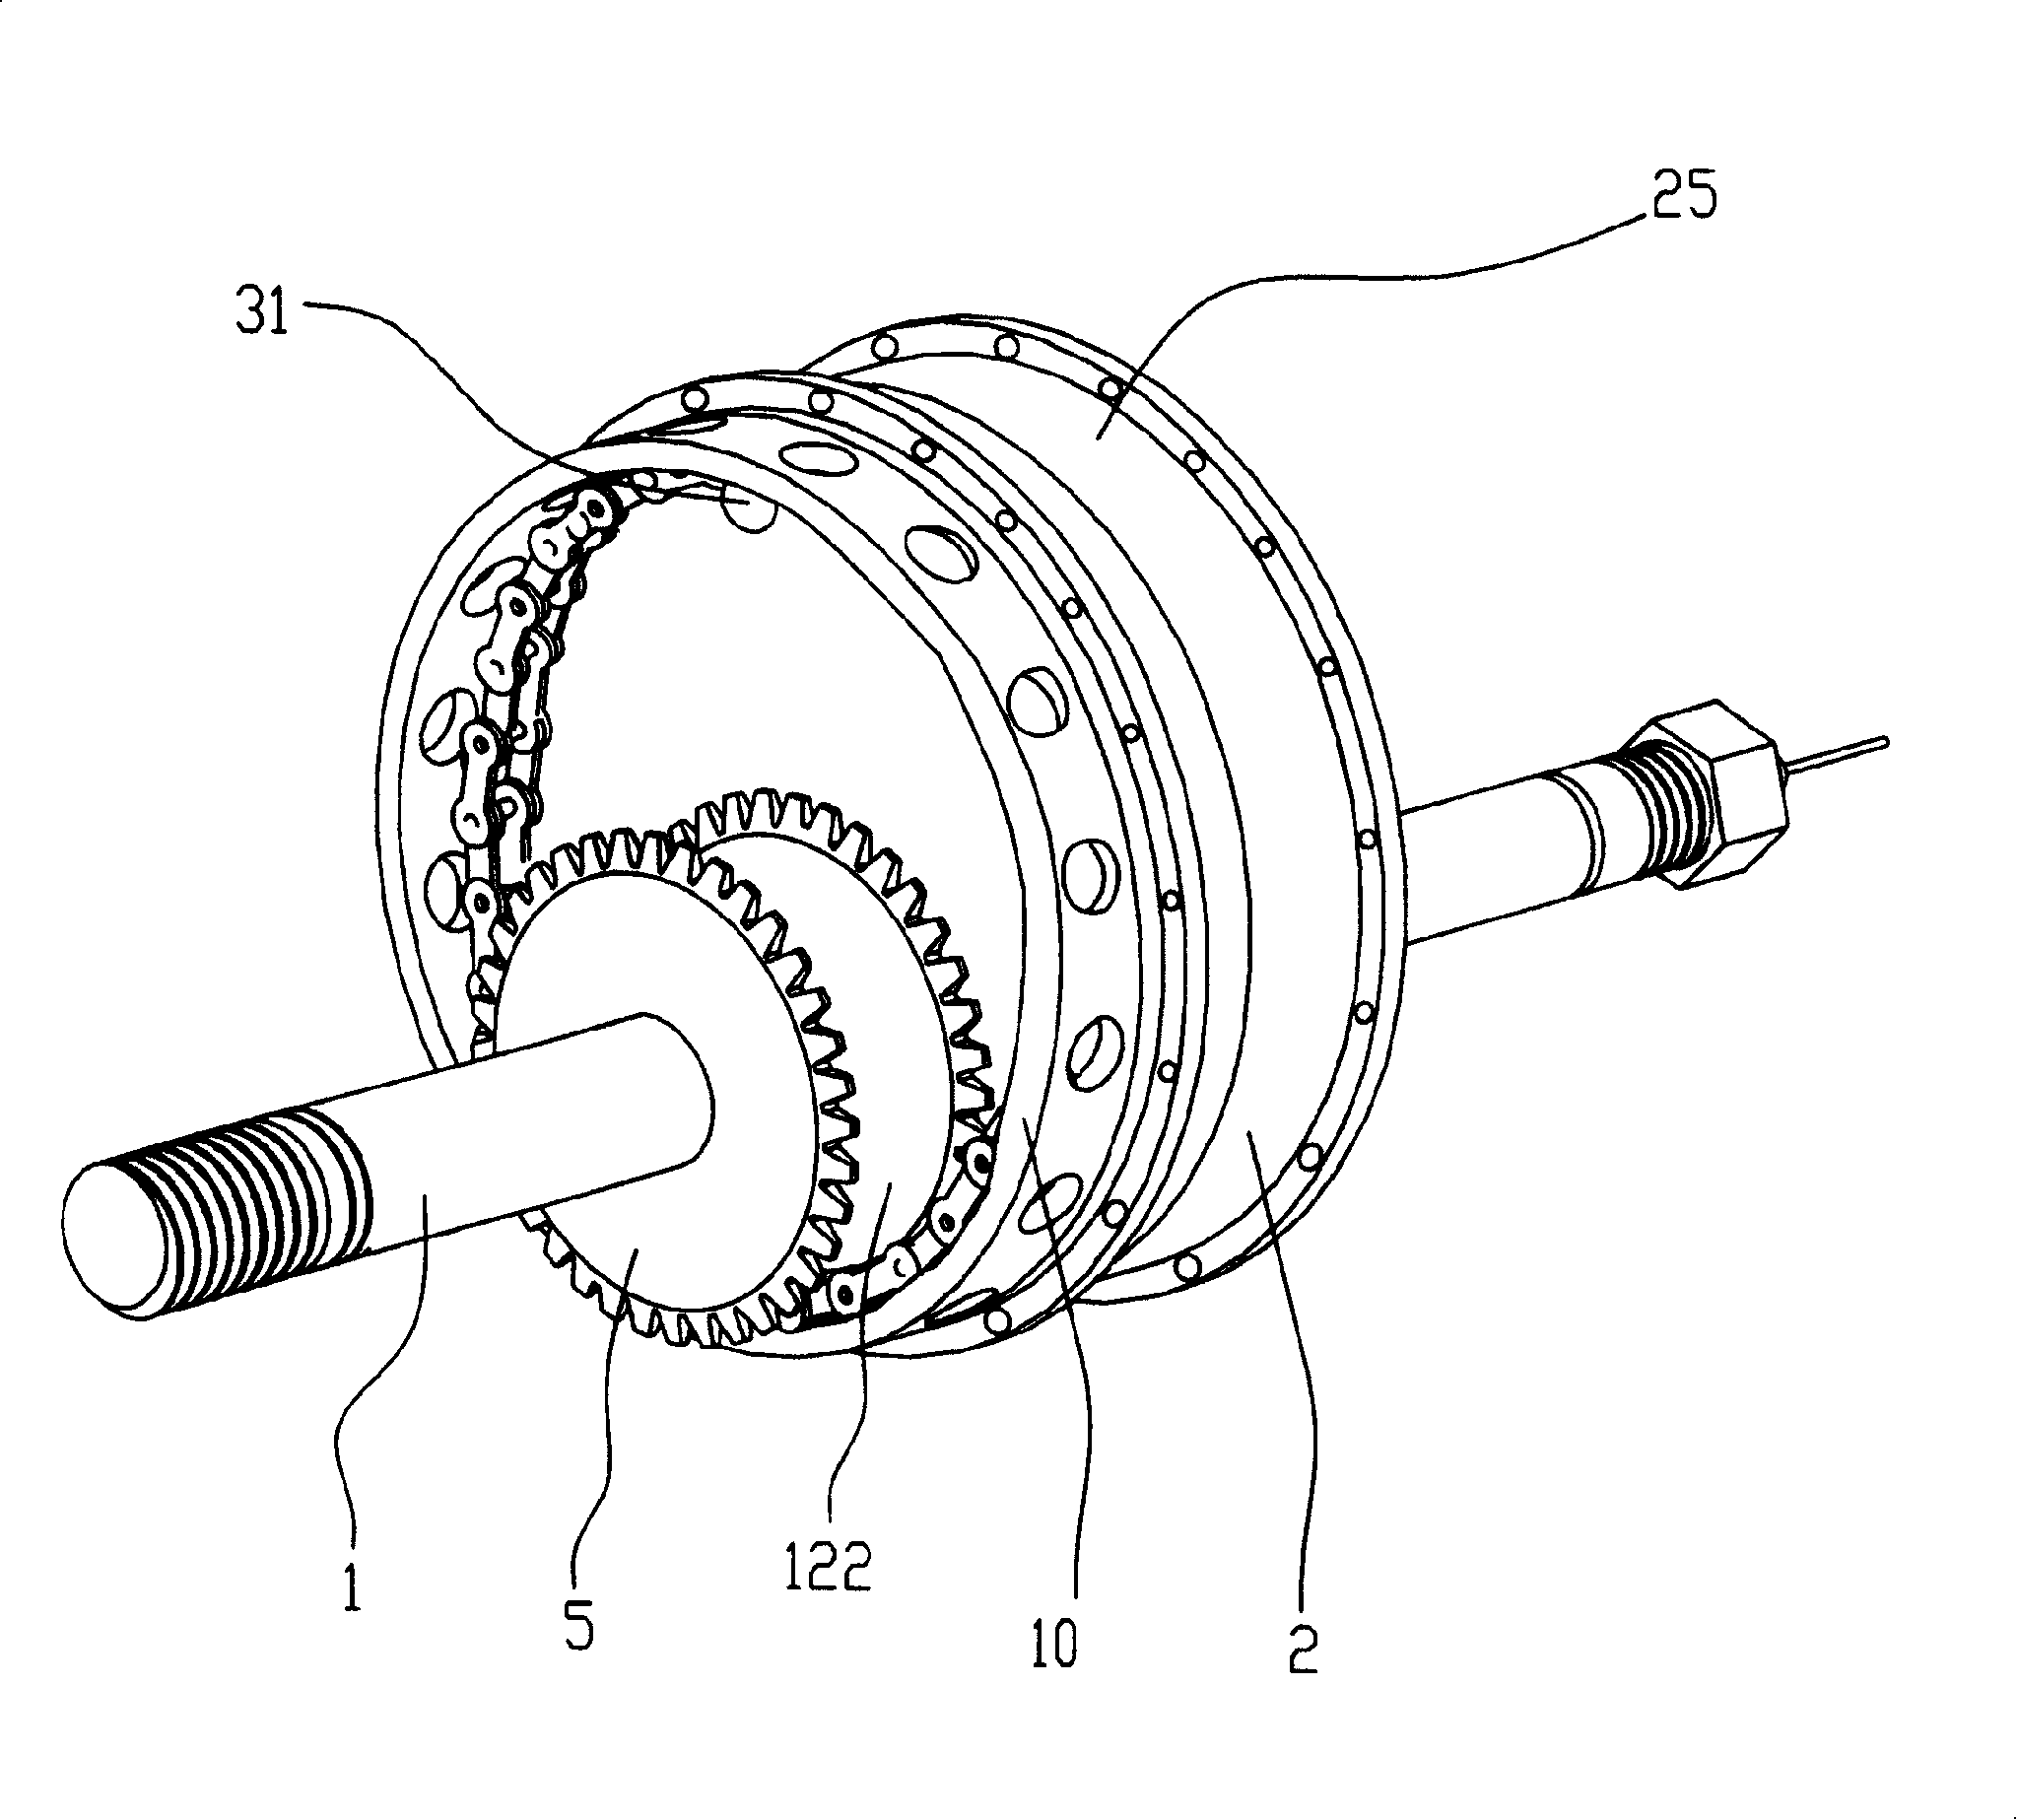 Bicycle with eccentric wheel shaft